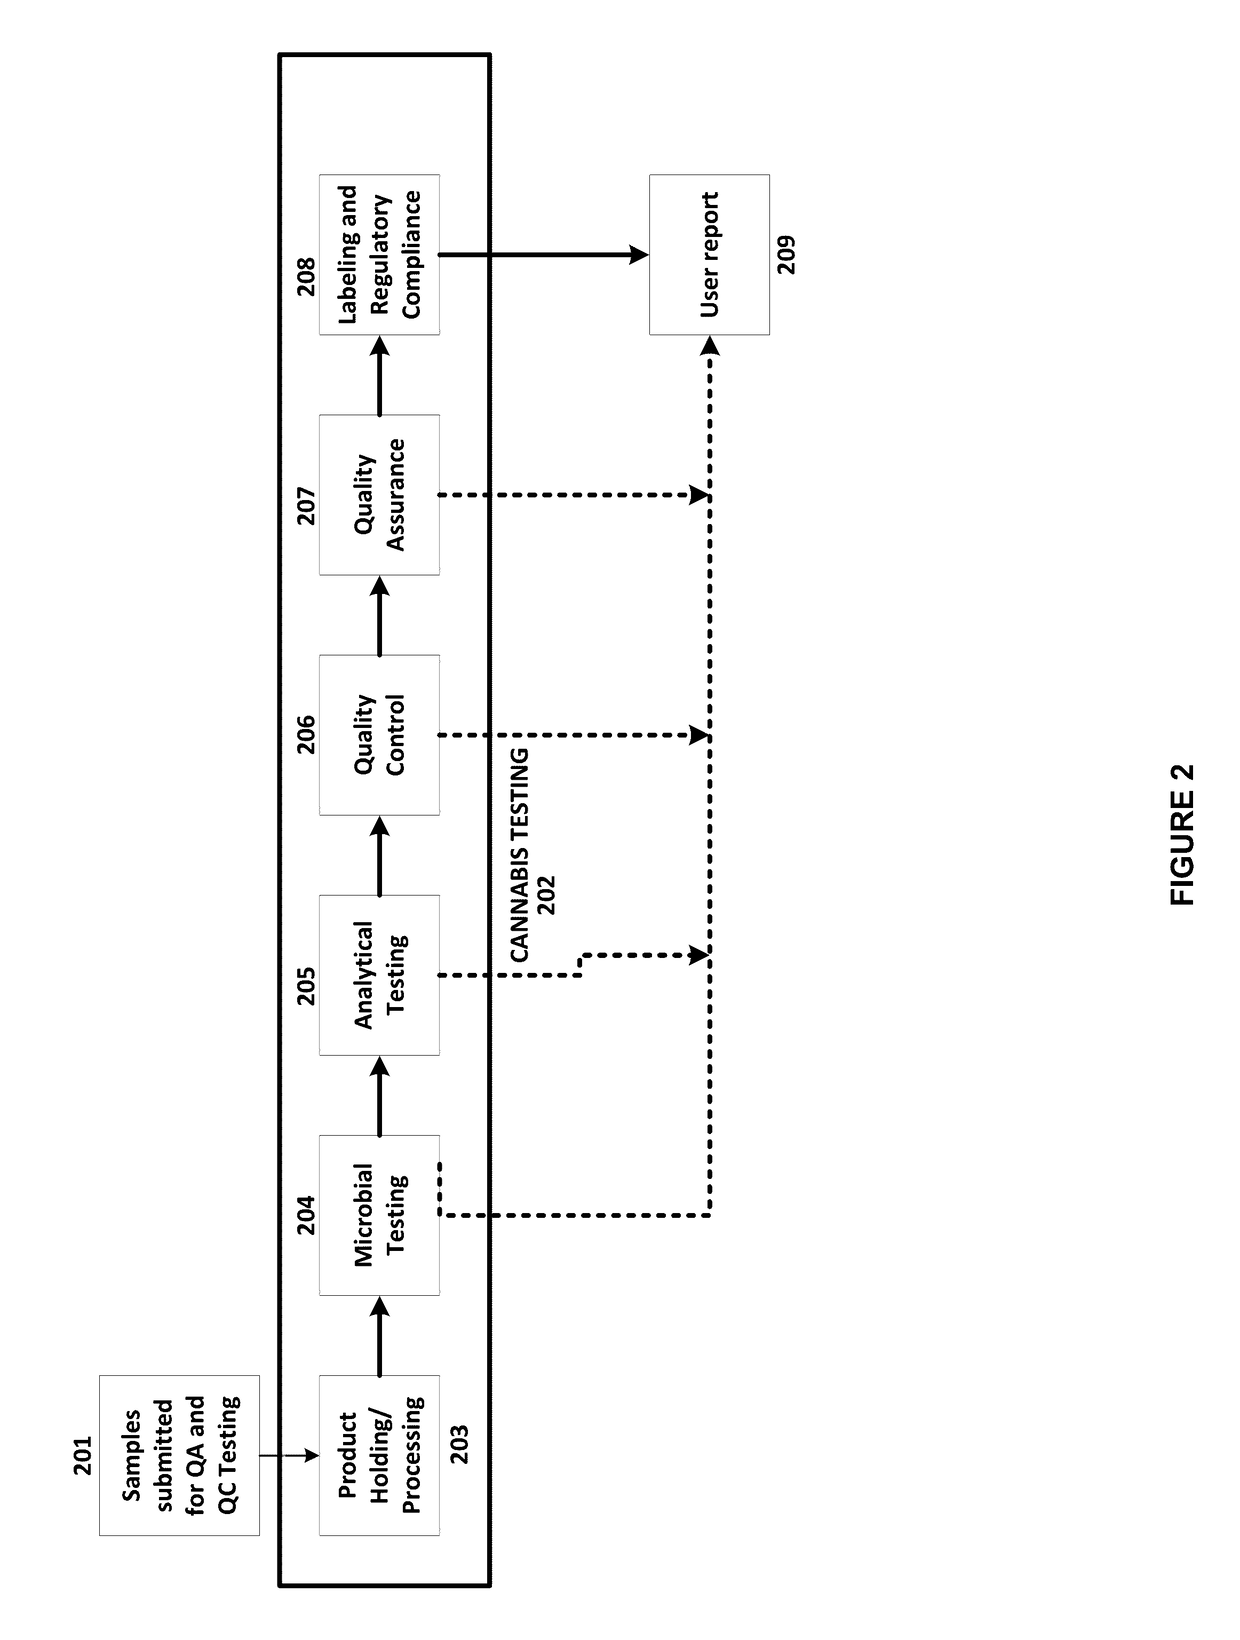 Integrated systems and methods of evaluating cannabis and cannabinoid products for public safety, quality control and quality assurance purposes